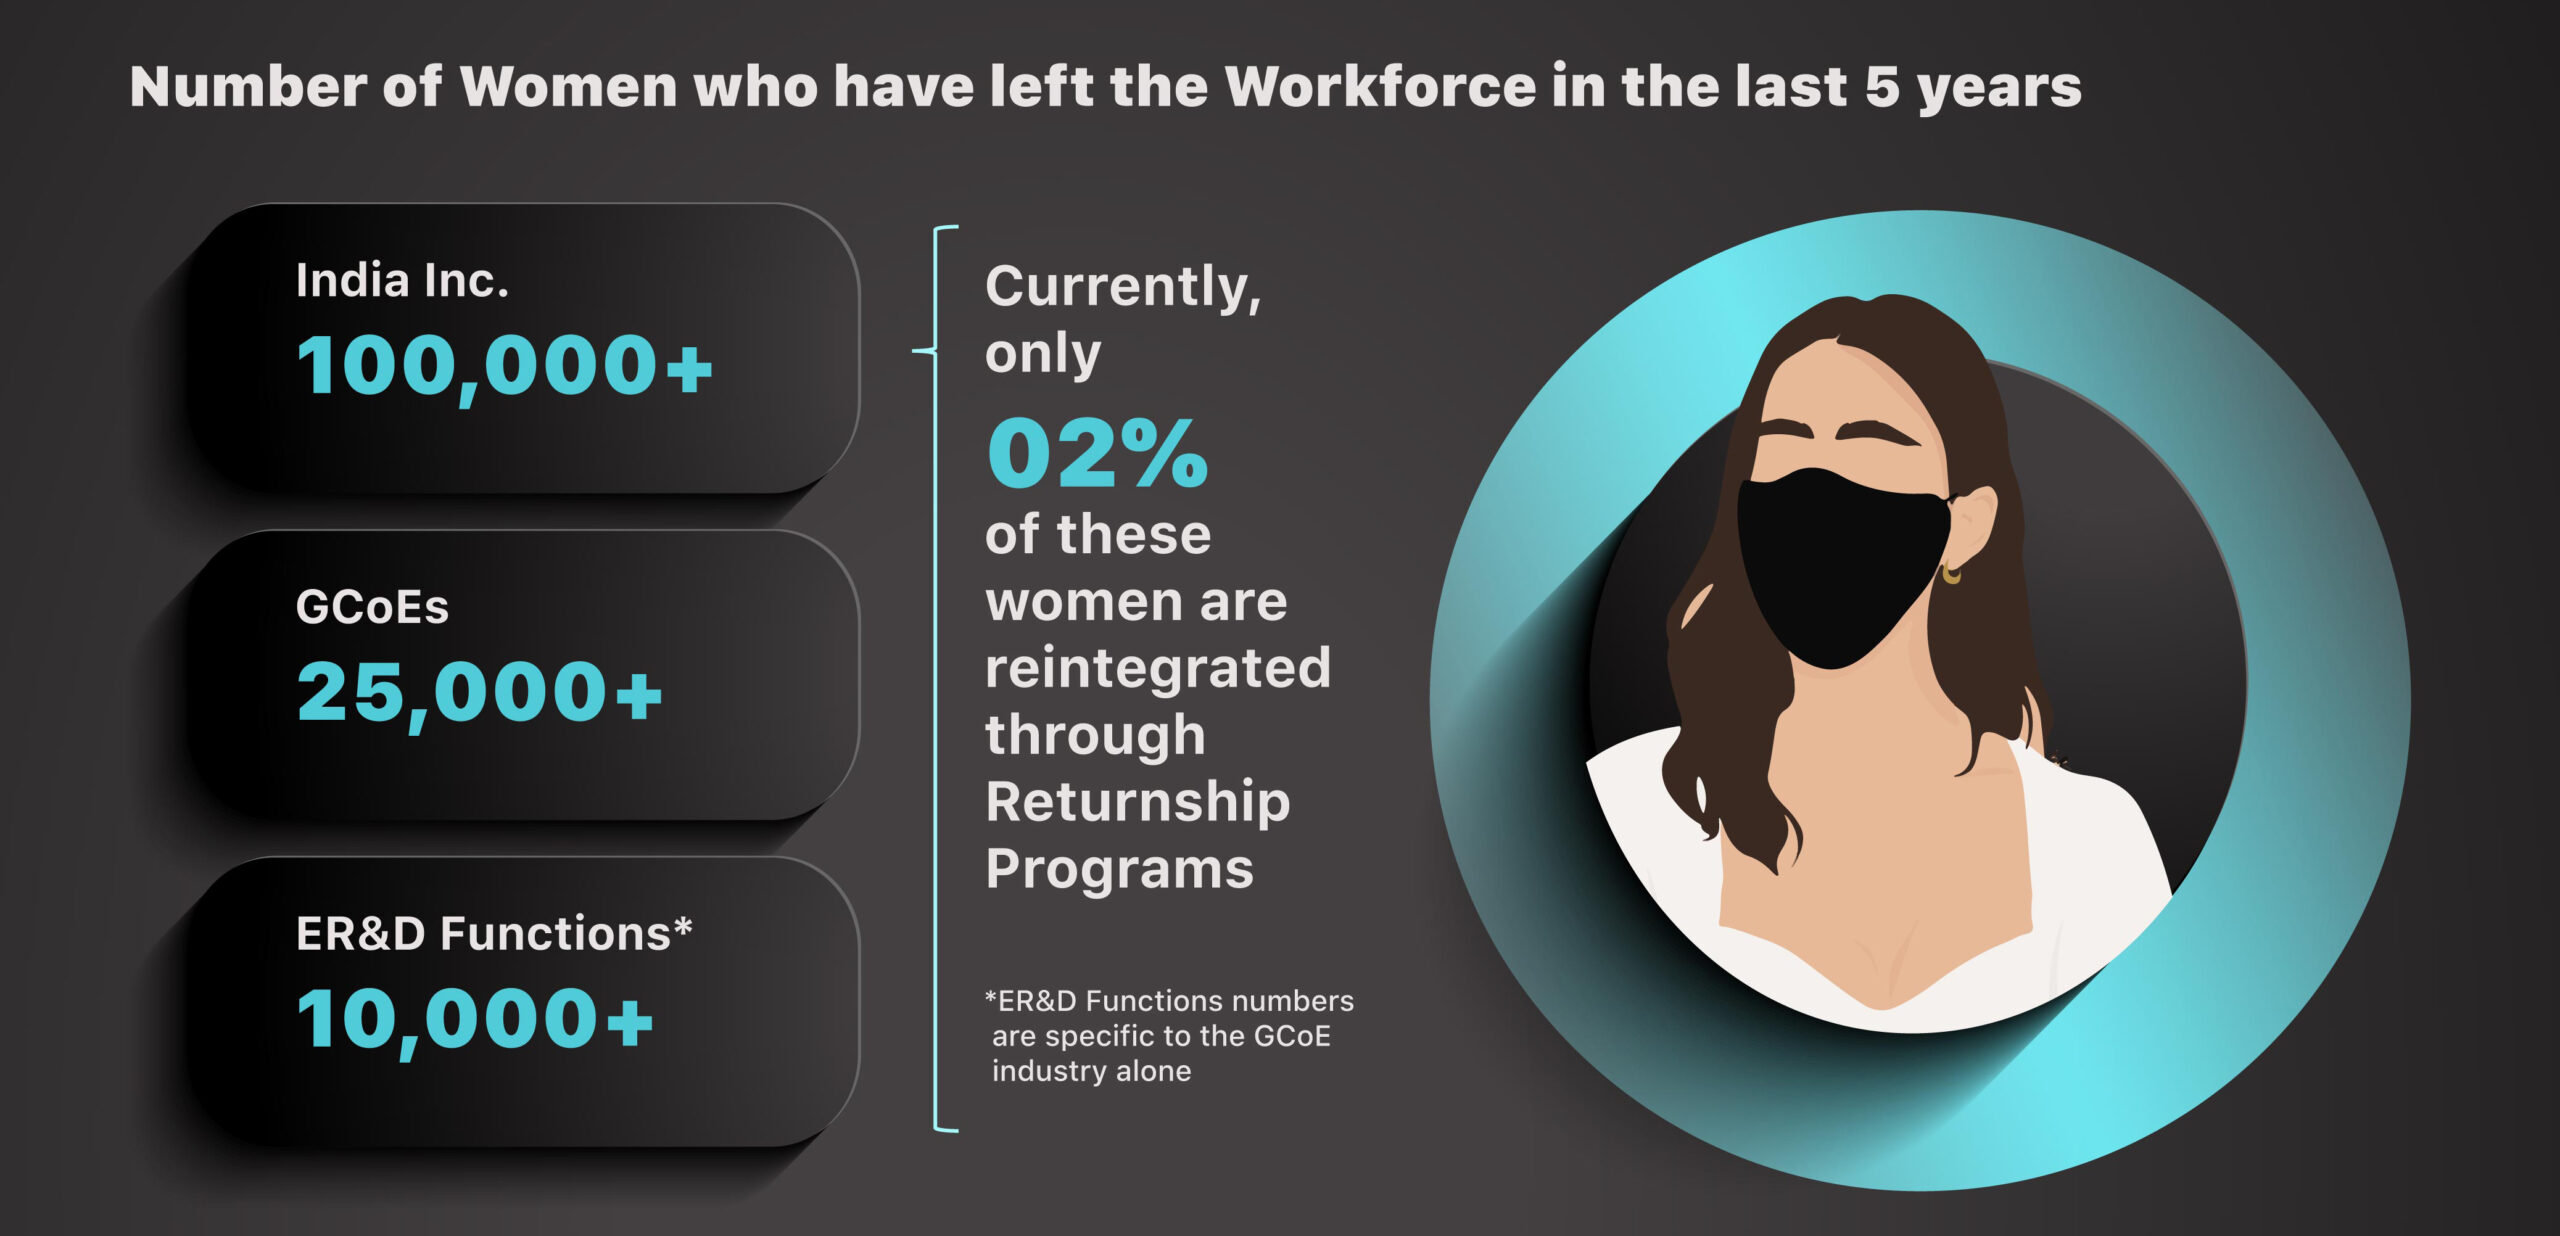 Number of women who have left the workforce in the last 5 years